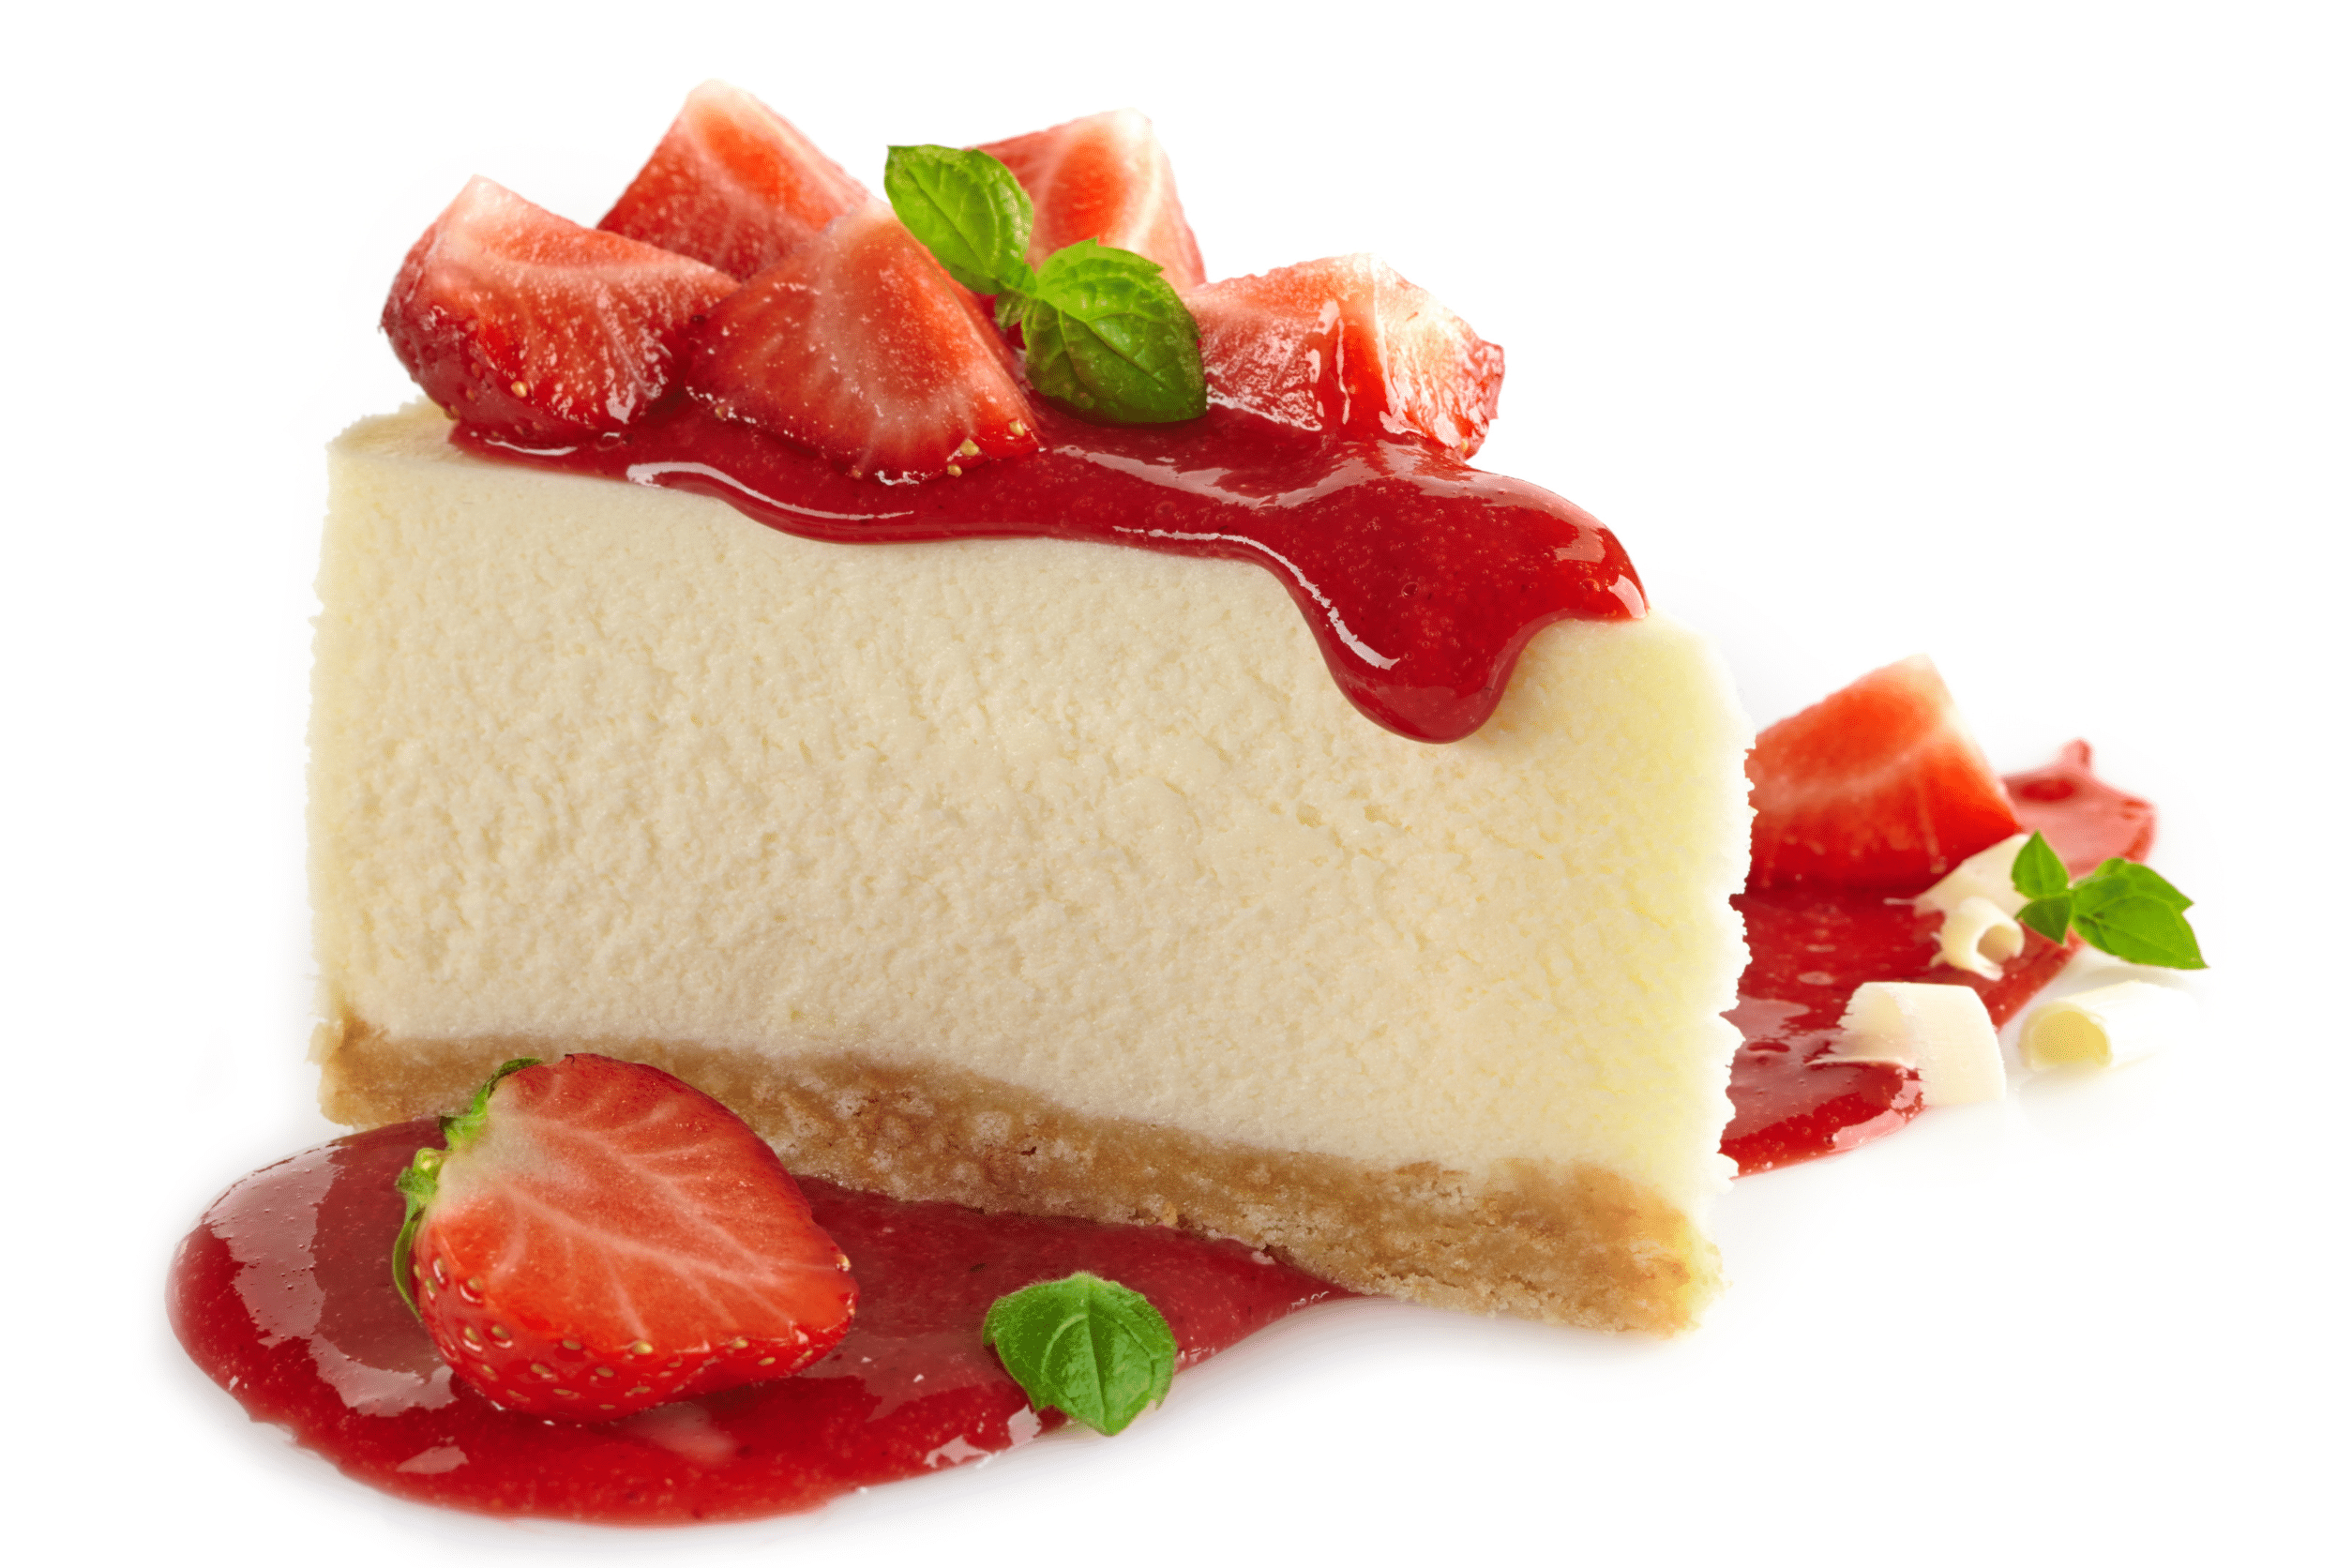 "Indulgent homemade cheesecake with creamy texture, topped with vibrant strawberries